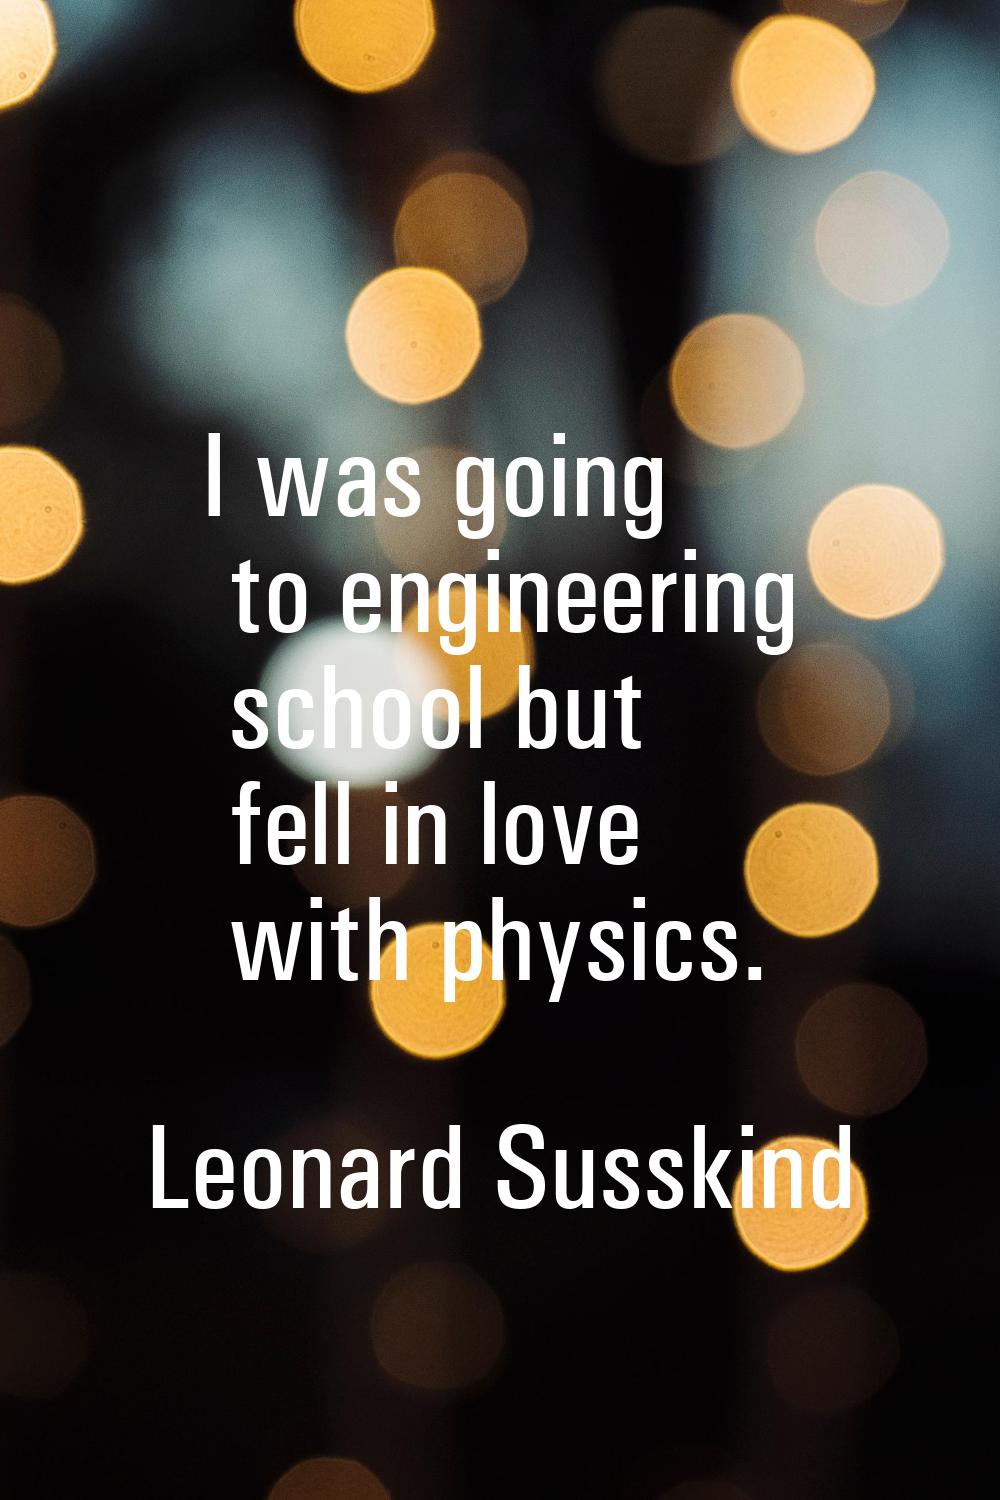 I was going to engineering school but fell in love with physics.